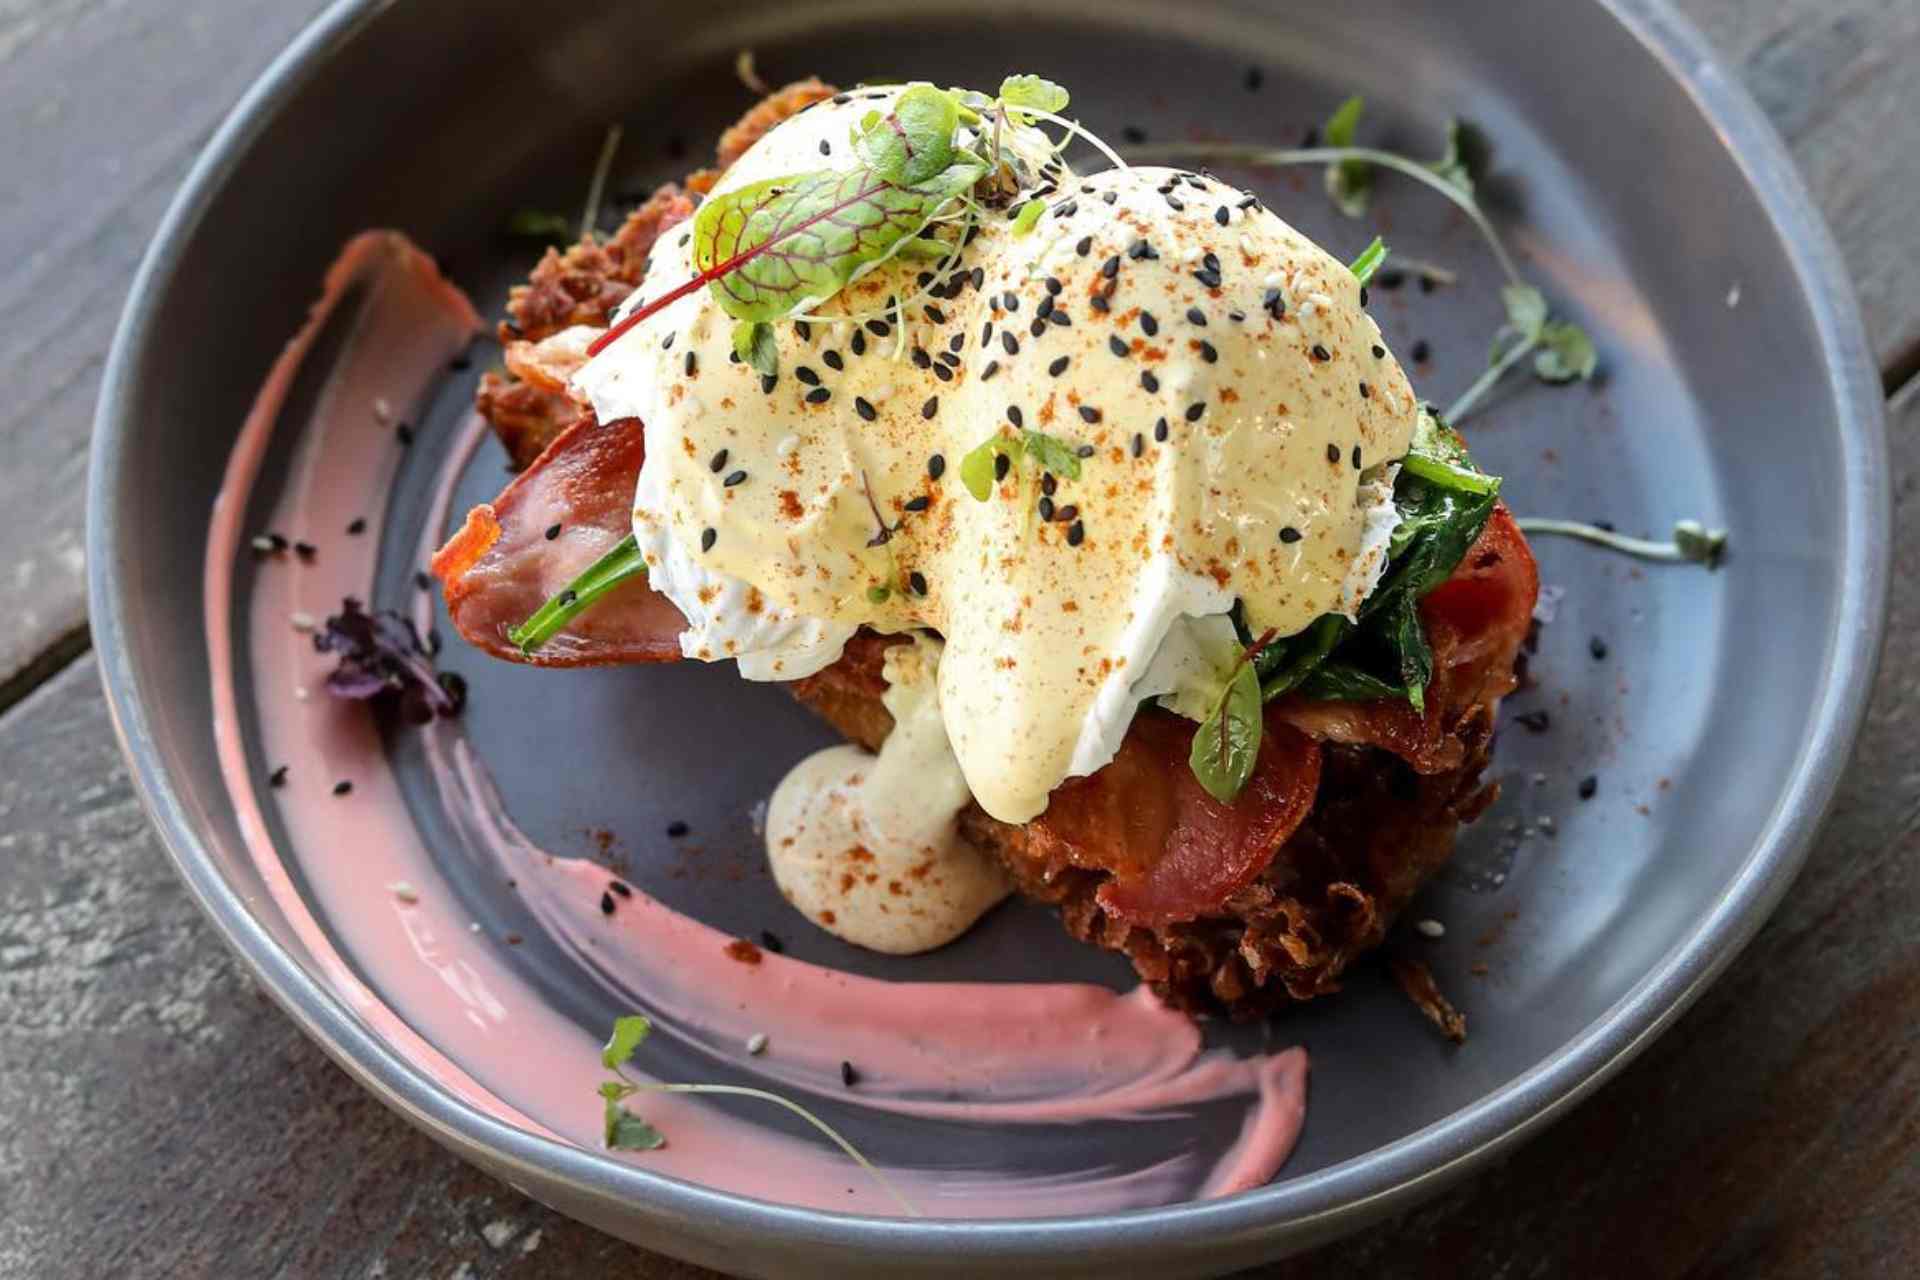 10 Best Restaurants for Cheap Eats in Canberra - Wildflour Cafe at Cooleman Court